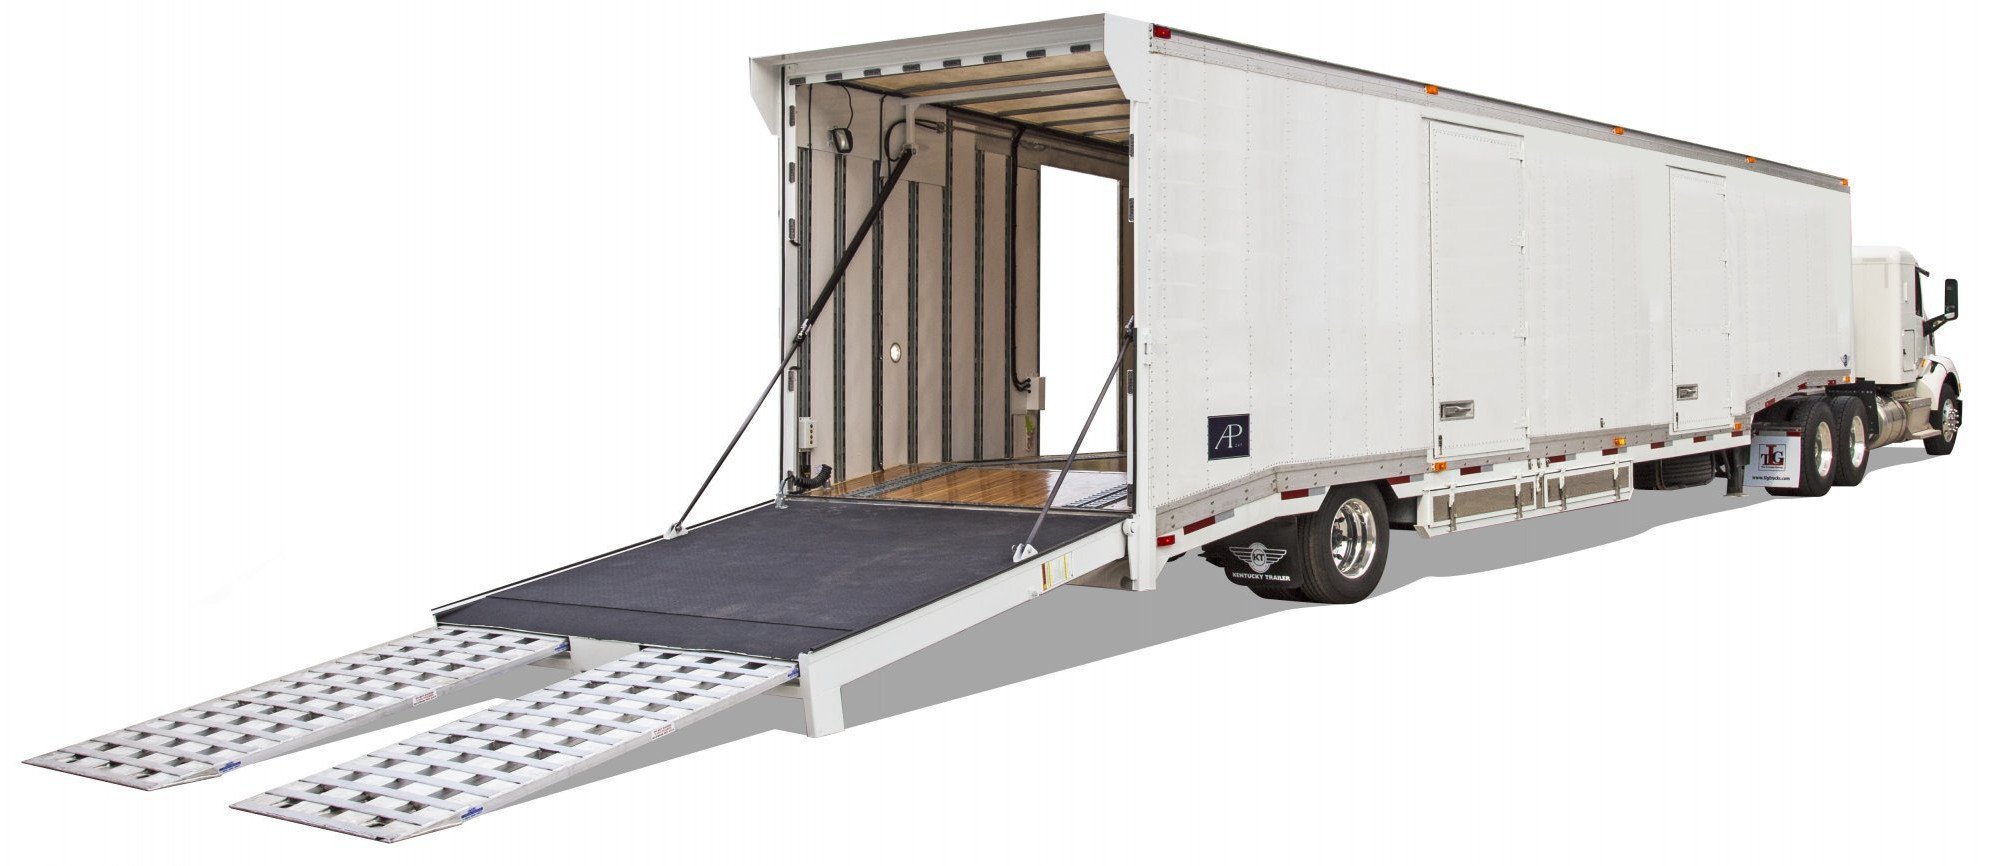 Enclosed Auto/Vehicle Transport, Specialty Trailers